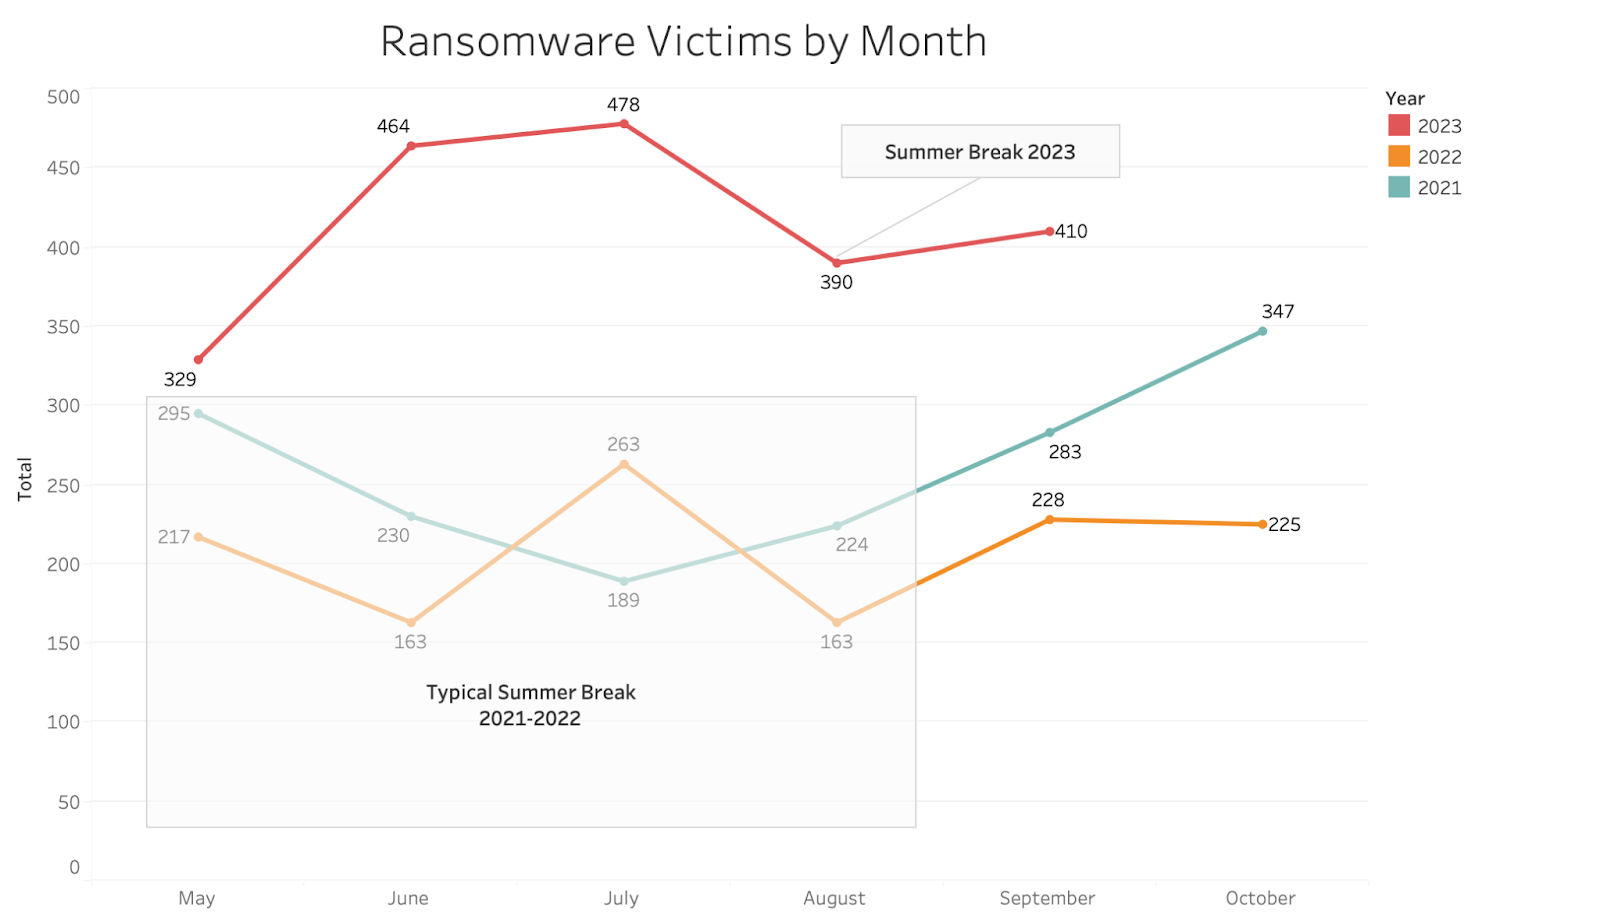 [LINE GRAPH] Ransomware Victims by Month (Including Typical Summer Break) from Jan. 2021 - Sep. 2023